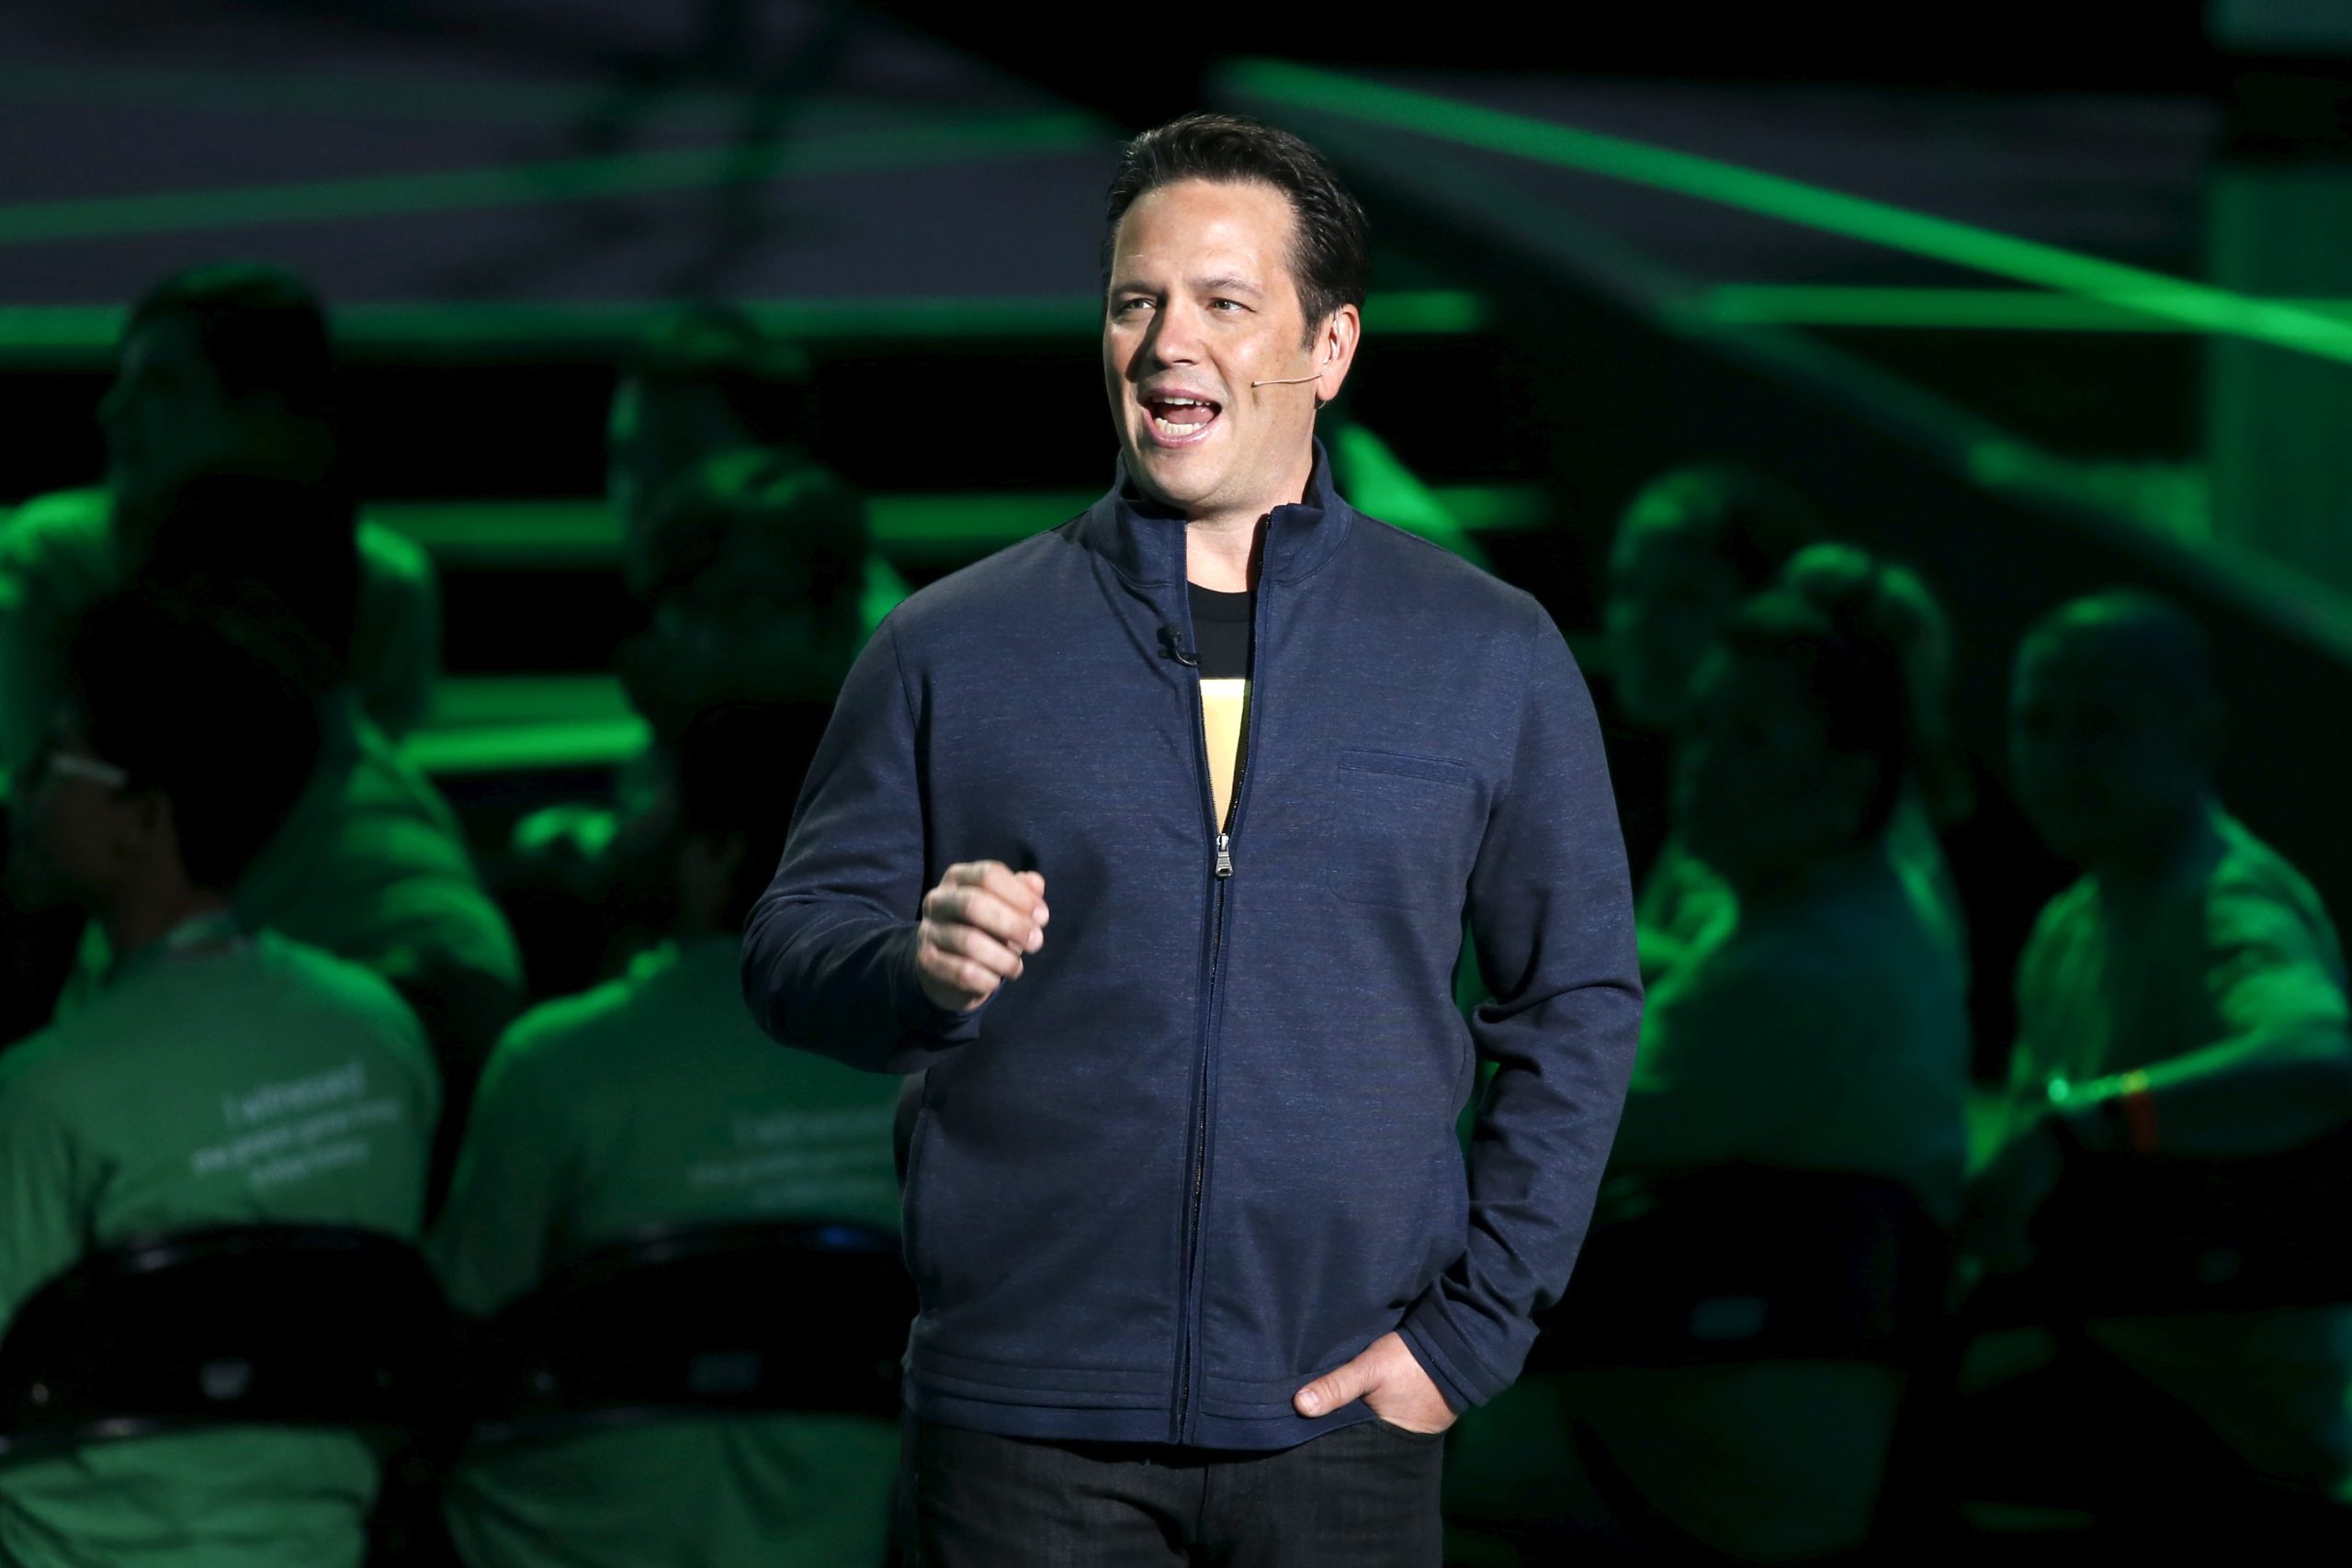 Phil Spencer says Microsoft will continue to ‘support and grow’ Halo amid 343 layoffs